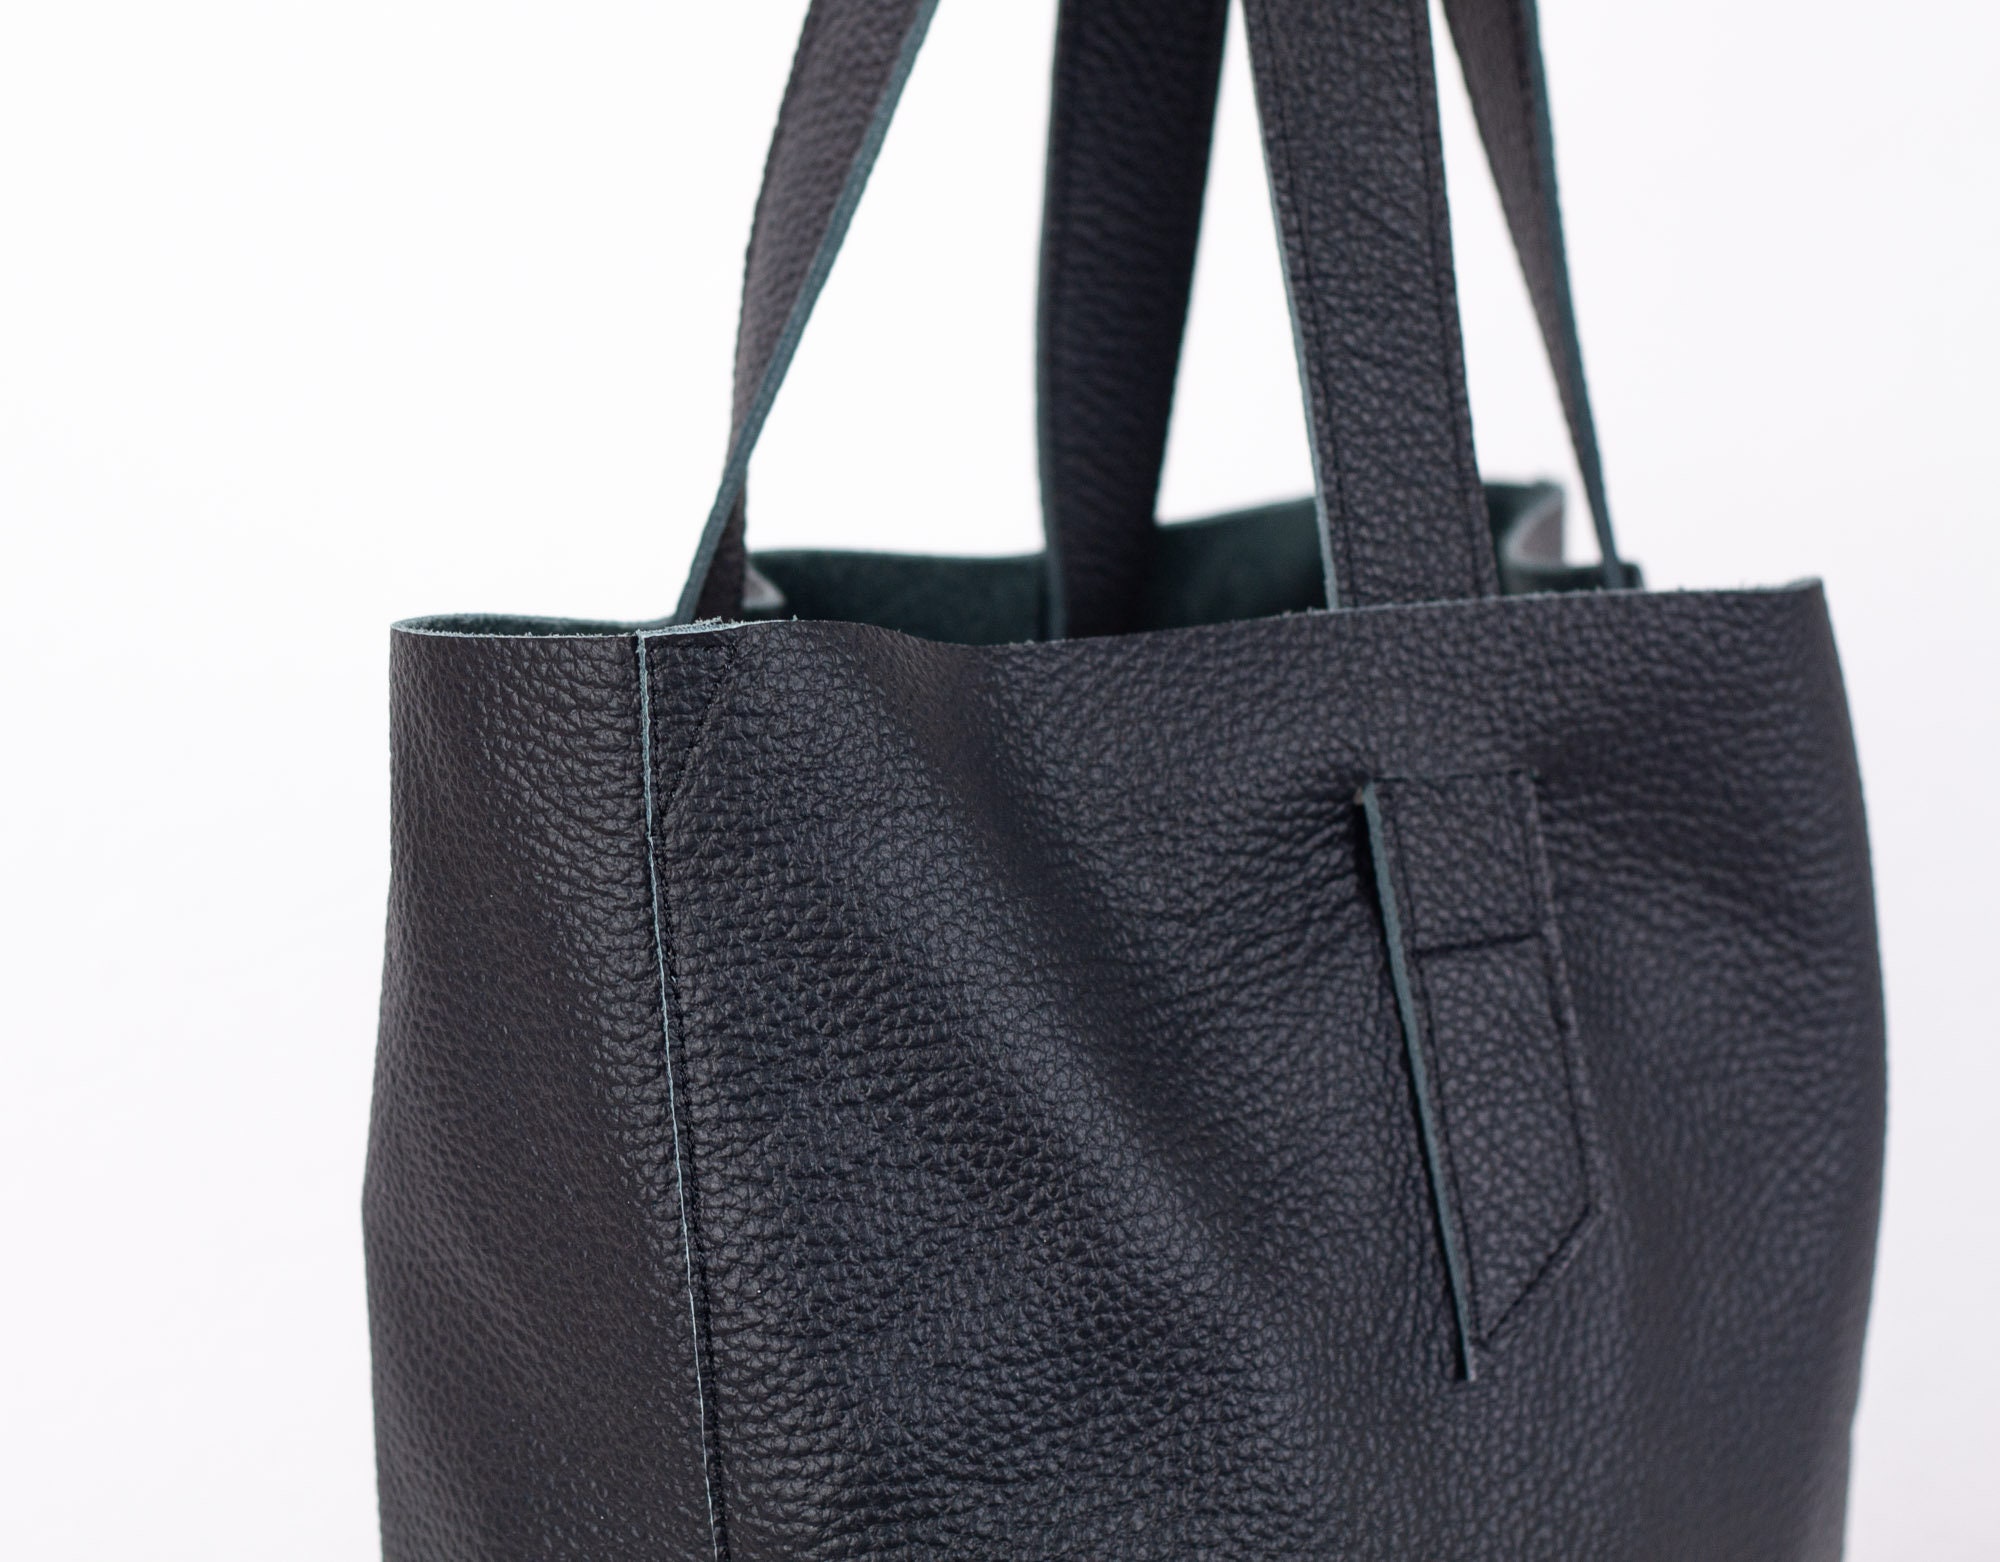 Gusset small pebble leather tote in black with white edge paint - ro bags